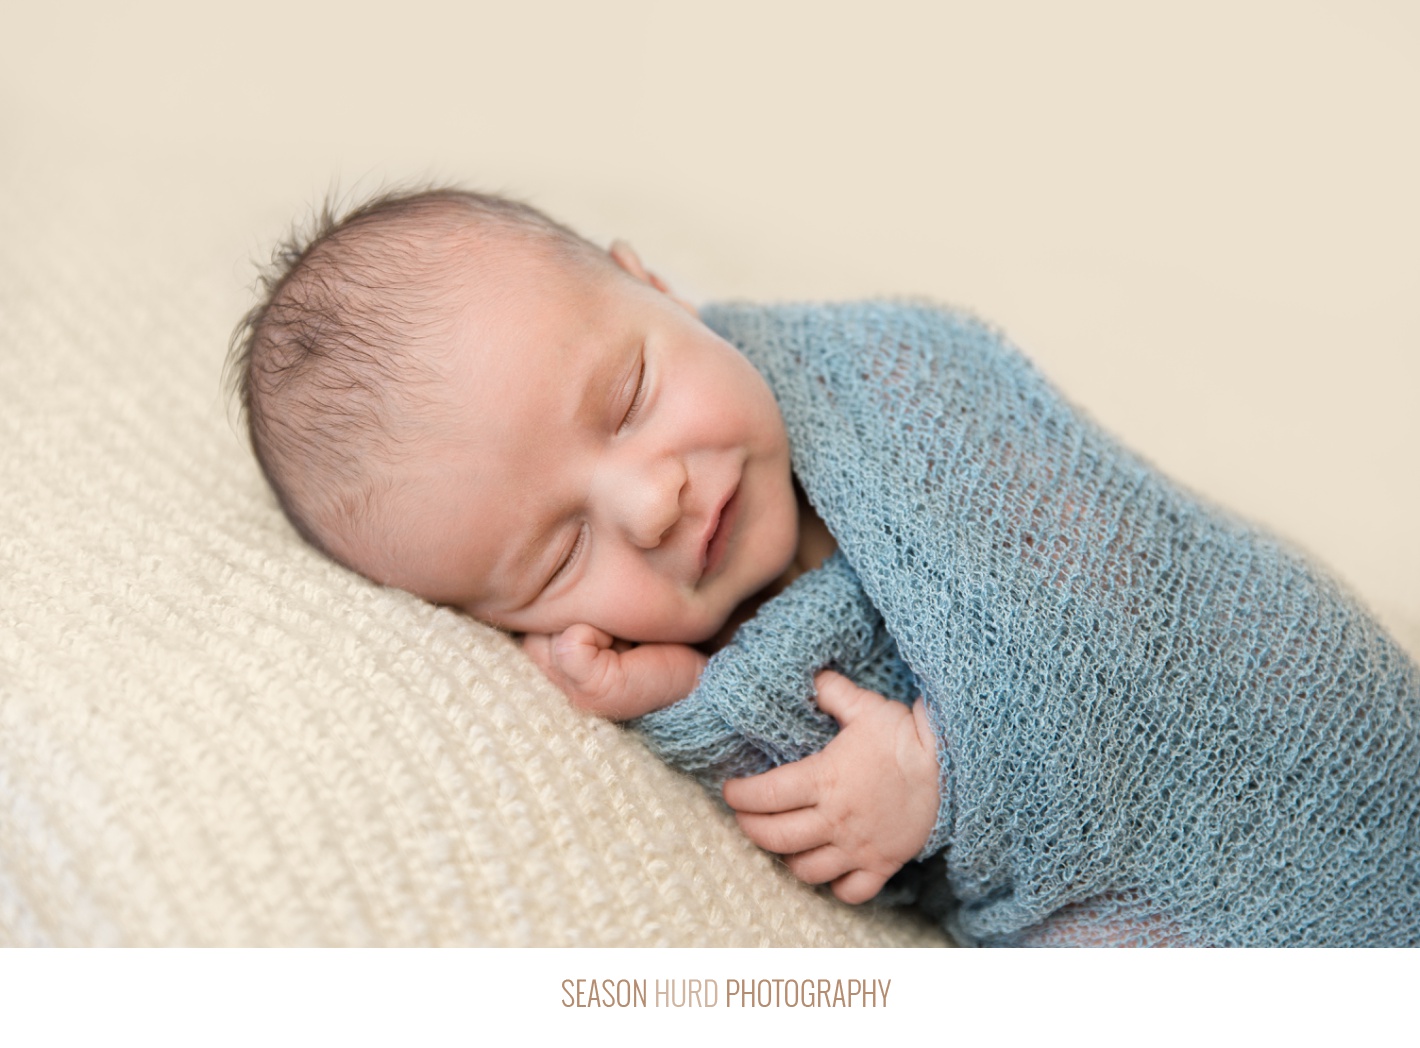 Newborn photography with baby wrapped in ice blue on a tan background